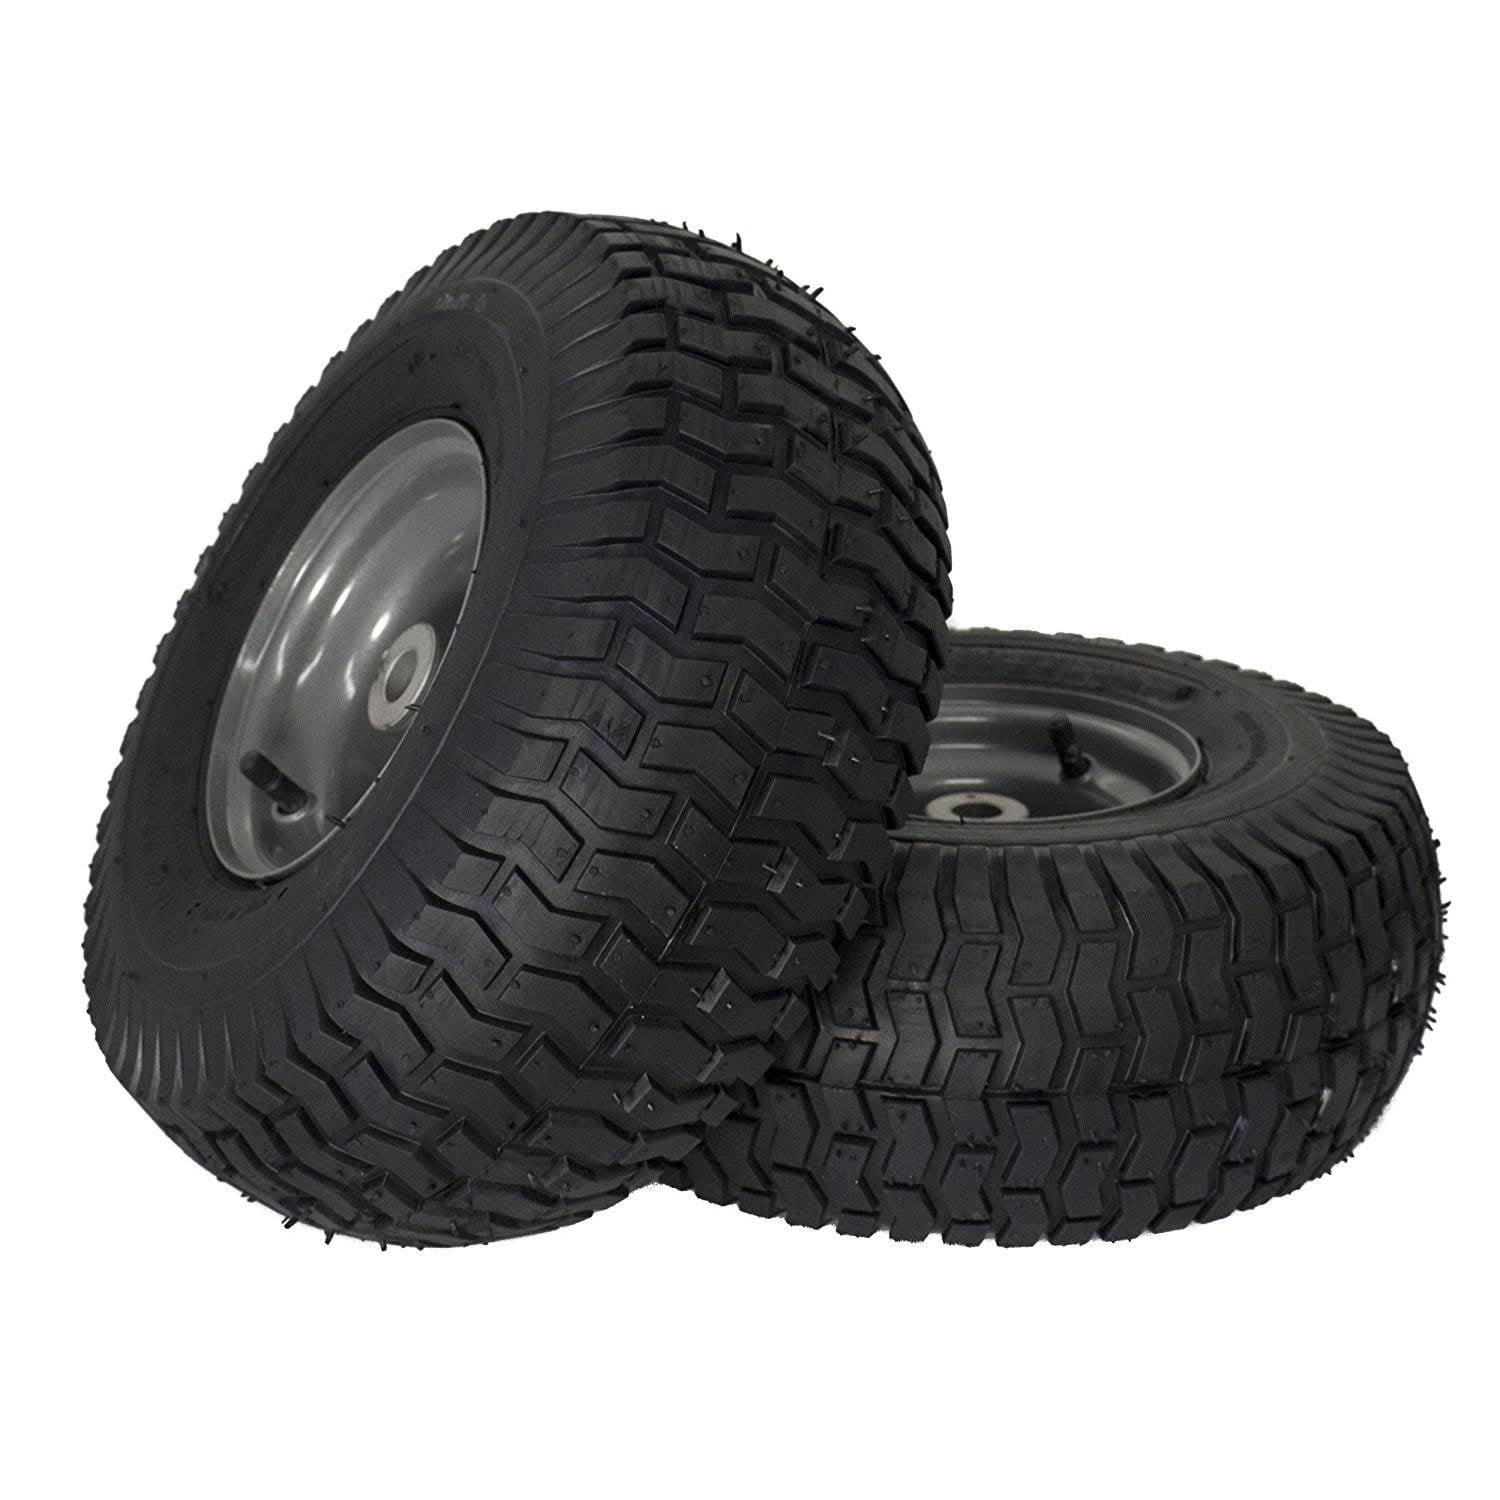 23x8.50-12 Tire AirLoc Brand Lawn and Garden Tire  23x850-12 HEAVY DUTY 6 Ply 